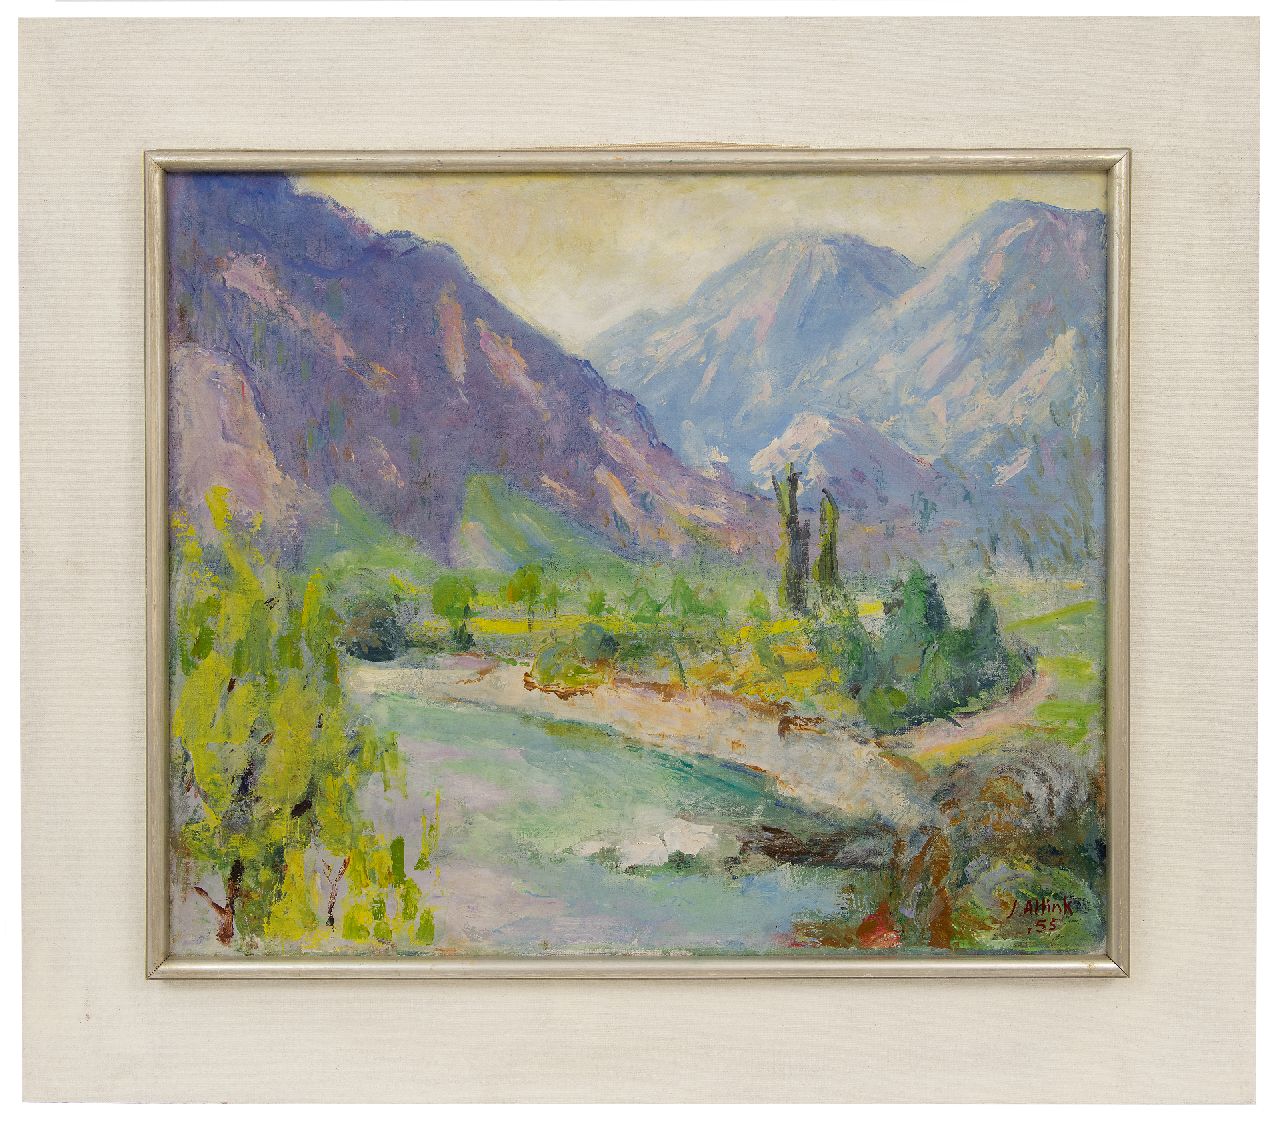 Altink J.  | Jan Altink | Paintings offered for sale | Landscape in the Haute Savoie, oil on canvas 50.4 x 60.4 cm, signed l.r. and dated '55